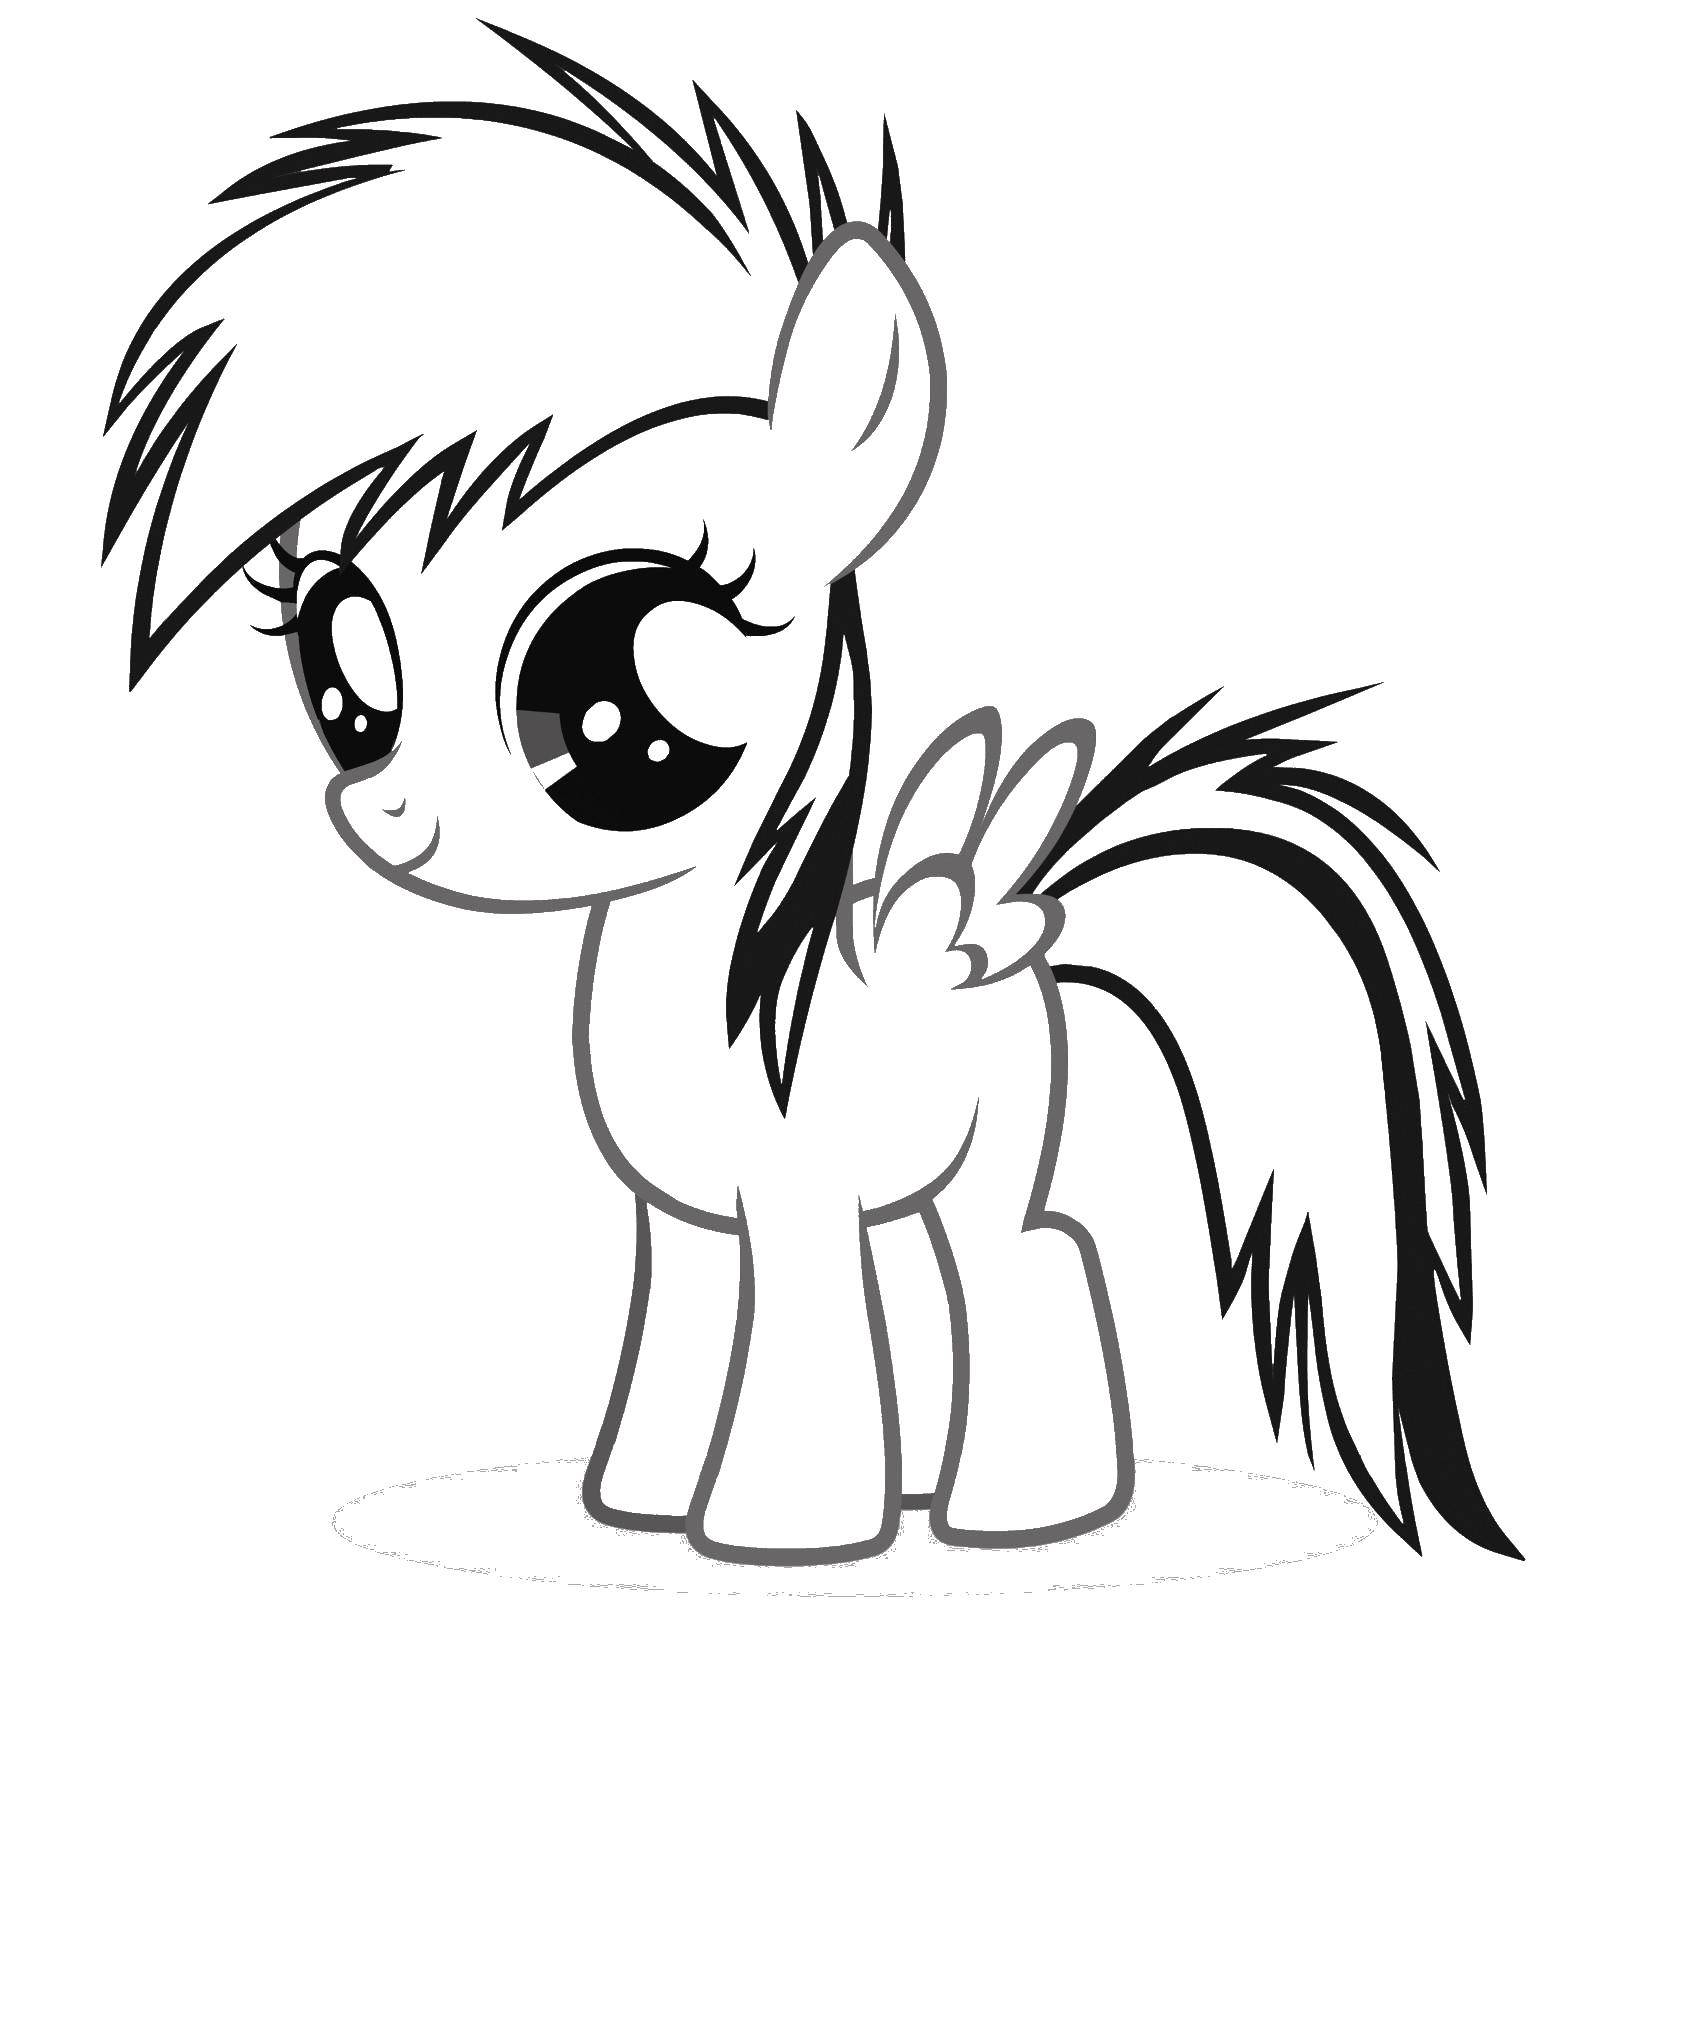 Coloring Scootaloo. Category my little pony. Tags:  ponies, Scootaloo.